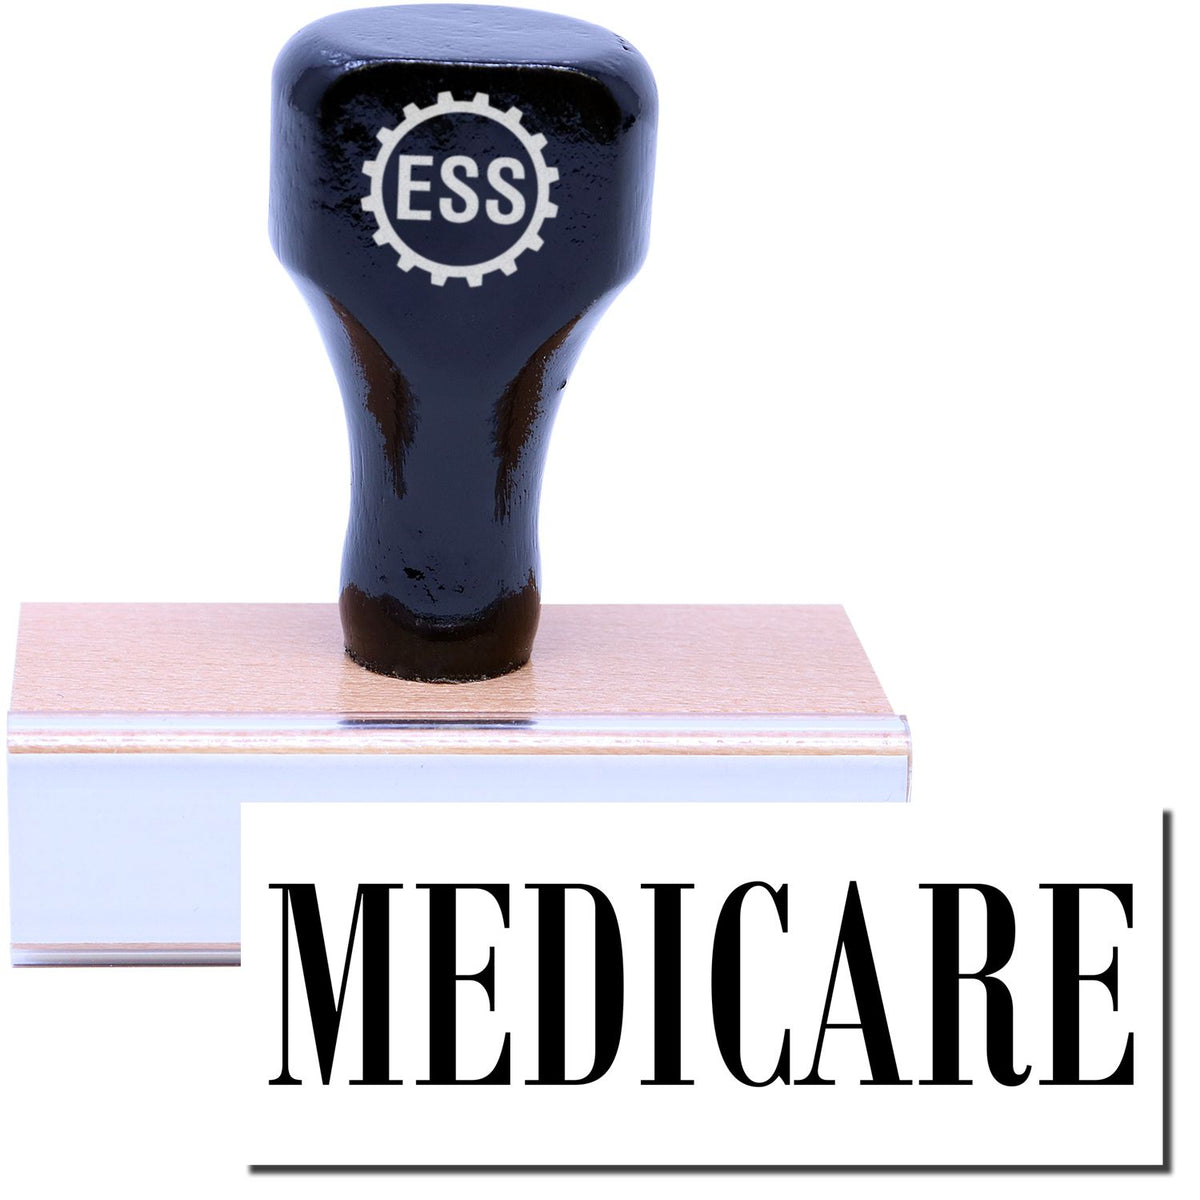 A stock office rubber stamp with a stamped image showing how the text &quot;MEDICARE&quot; is displayed after stamping.